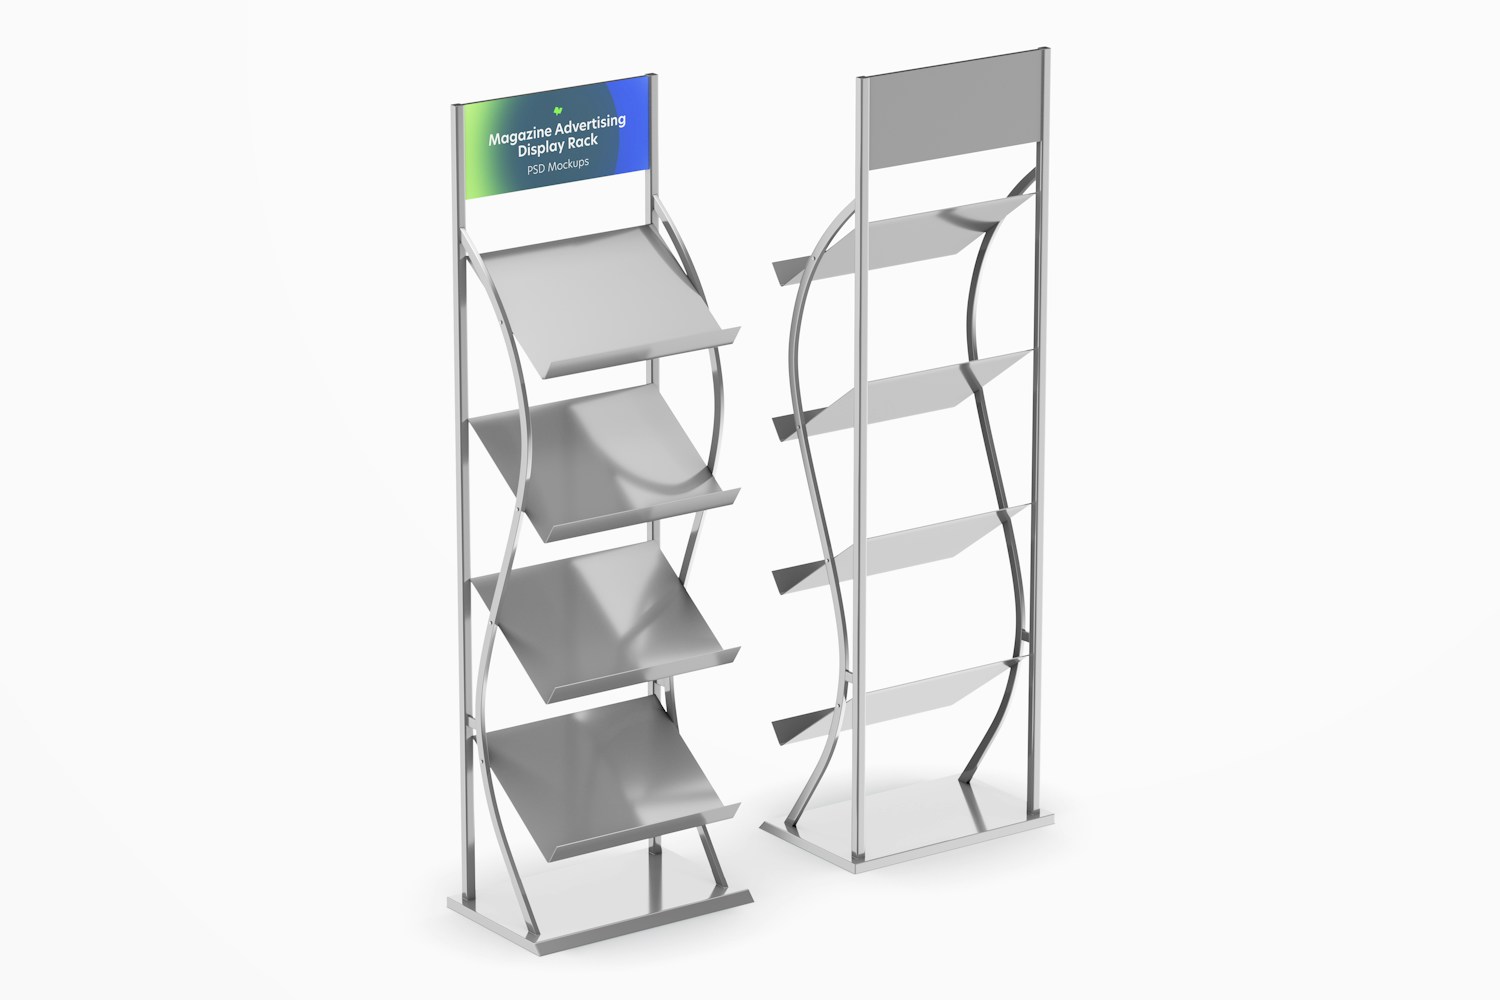 Magazine Advertising Display Rack Mockup, Front and Back View